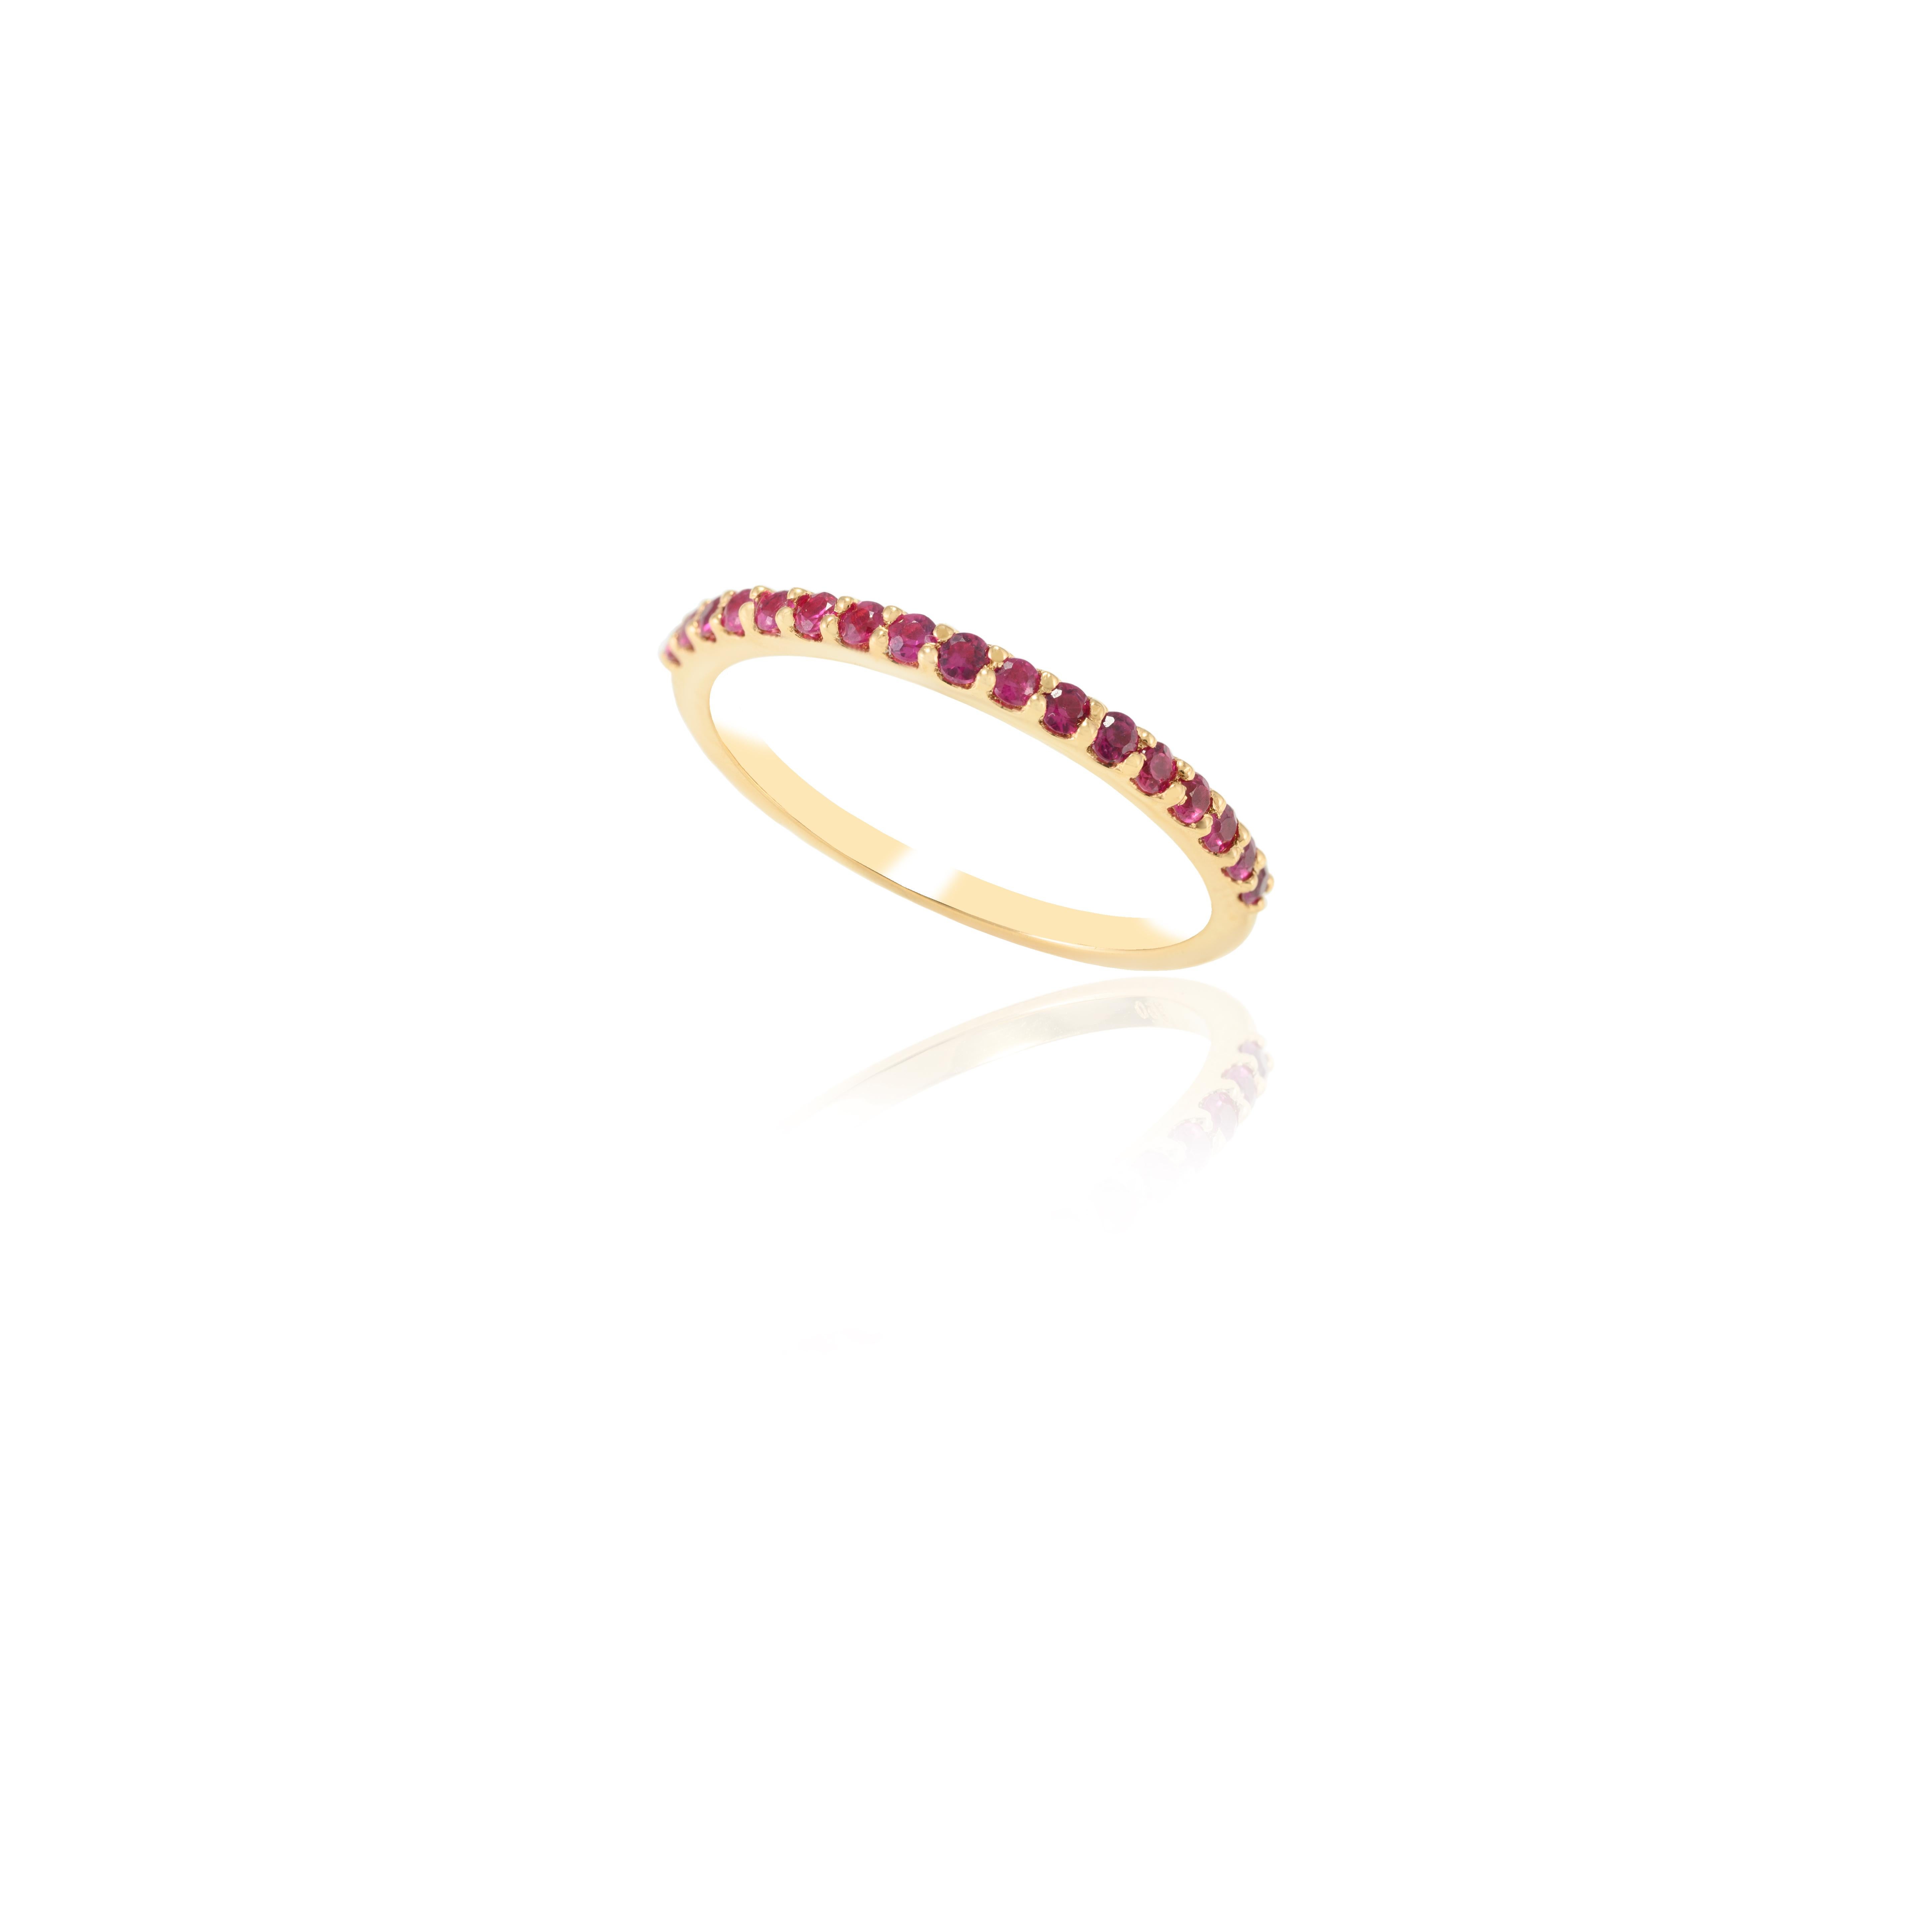 For Sale:  18k Solid Yellow Gold Stackable Round Cut Pave Ruby Gemstone Half Eternity Band 7